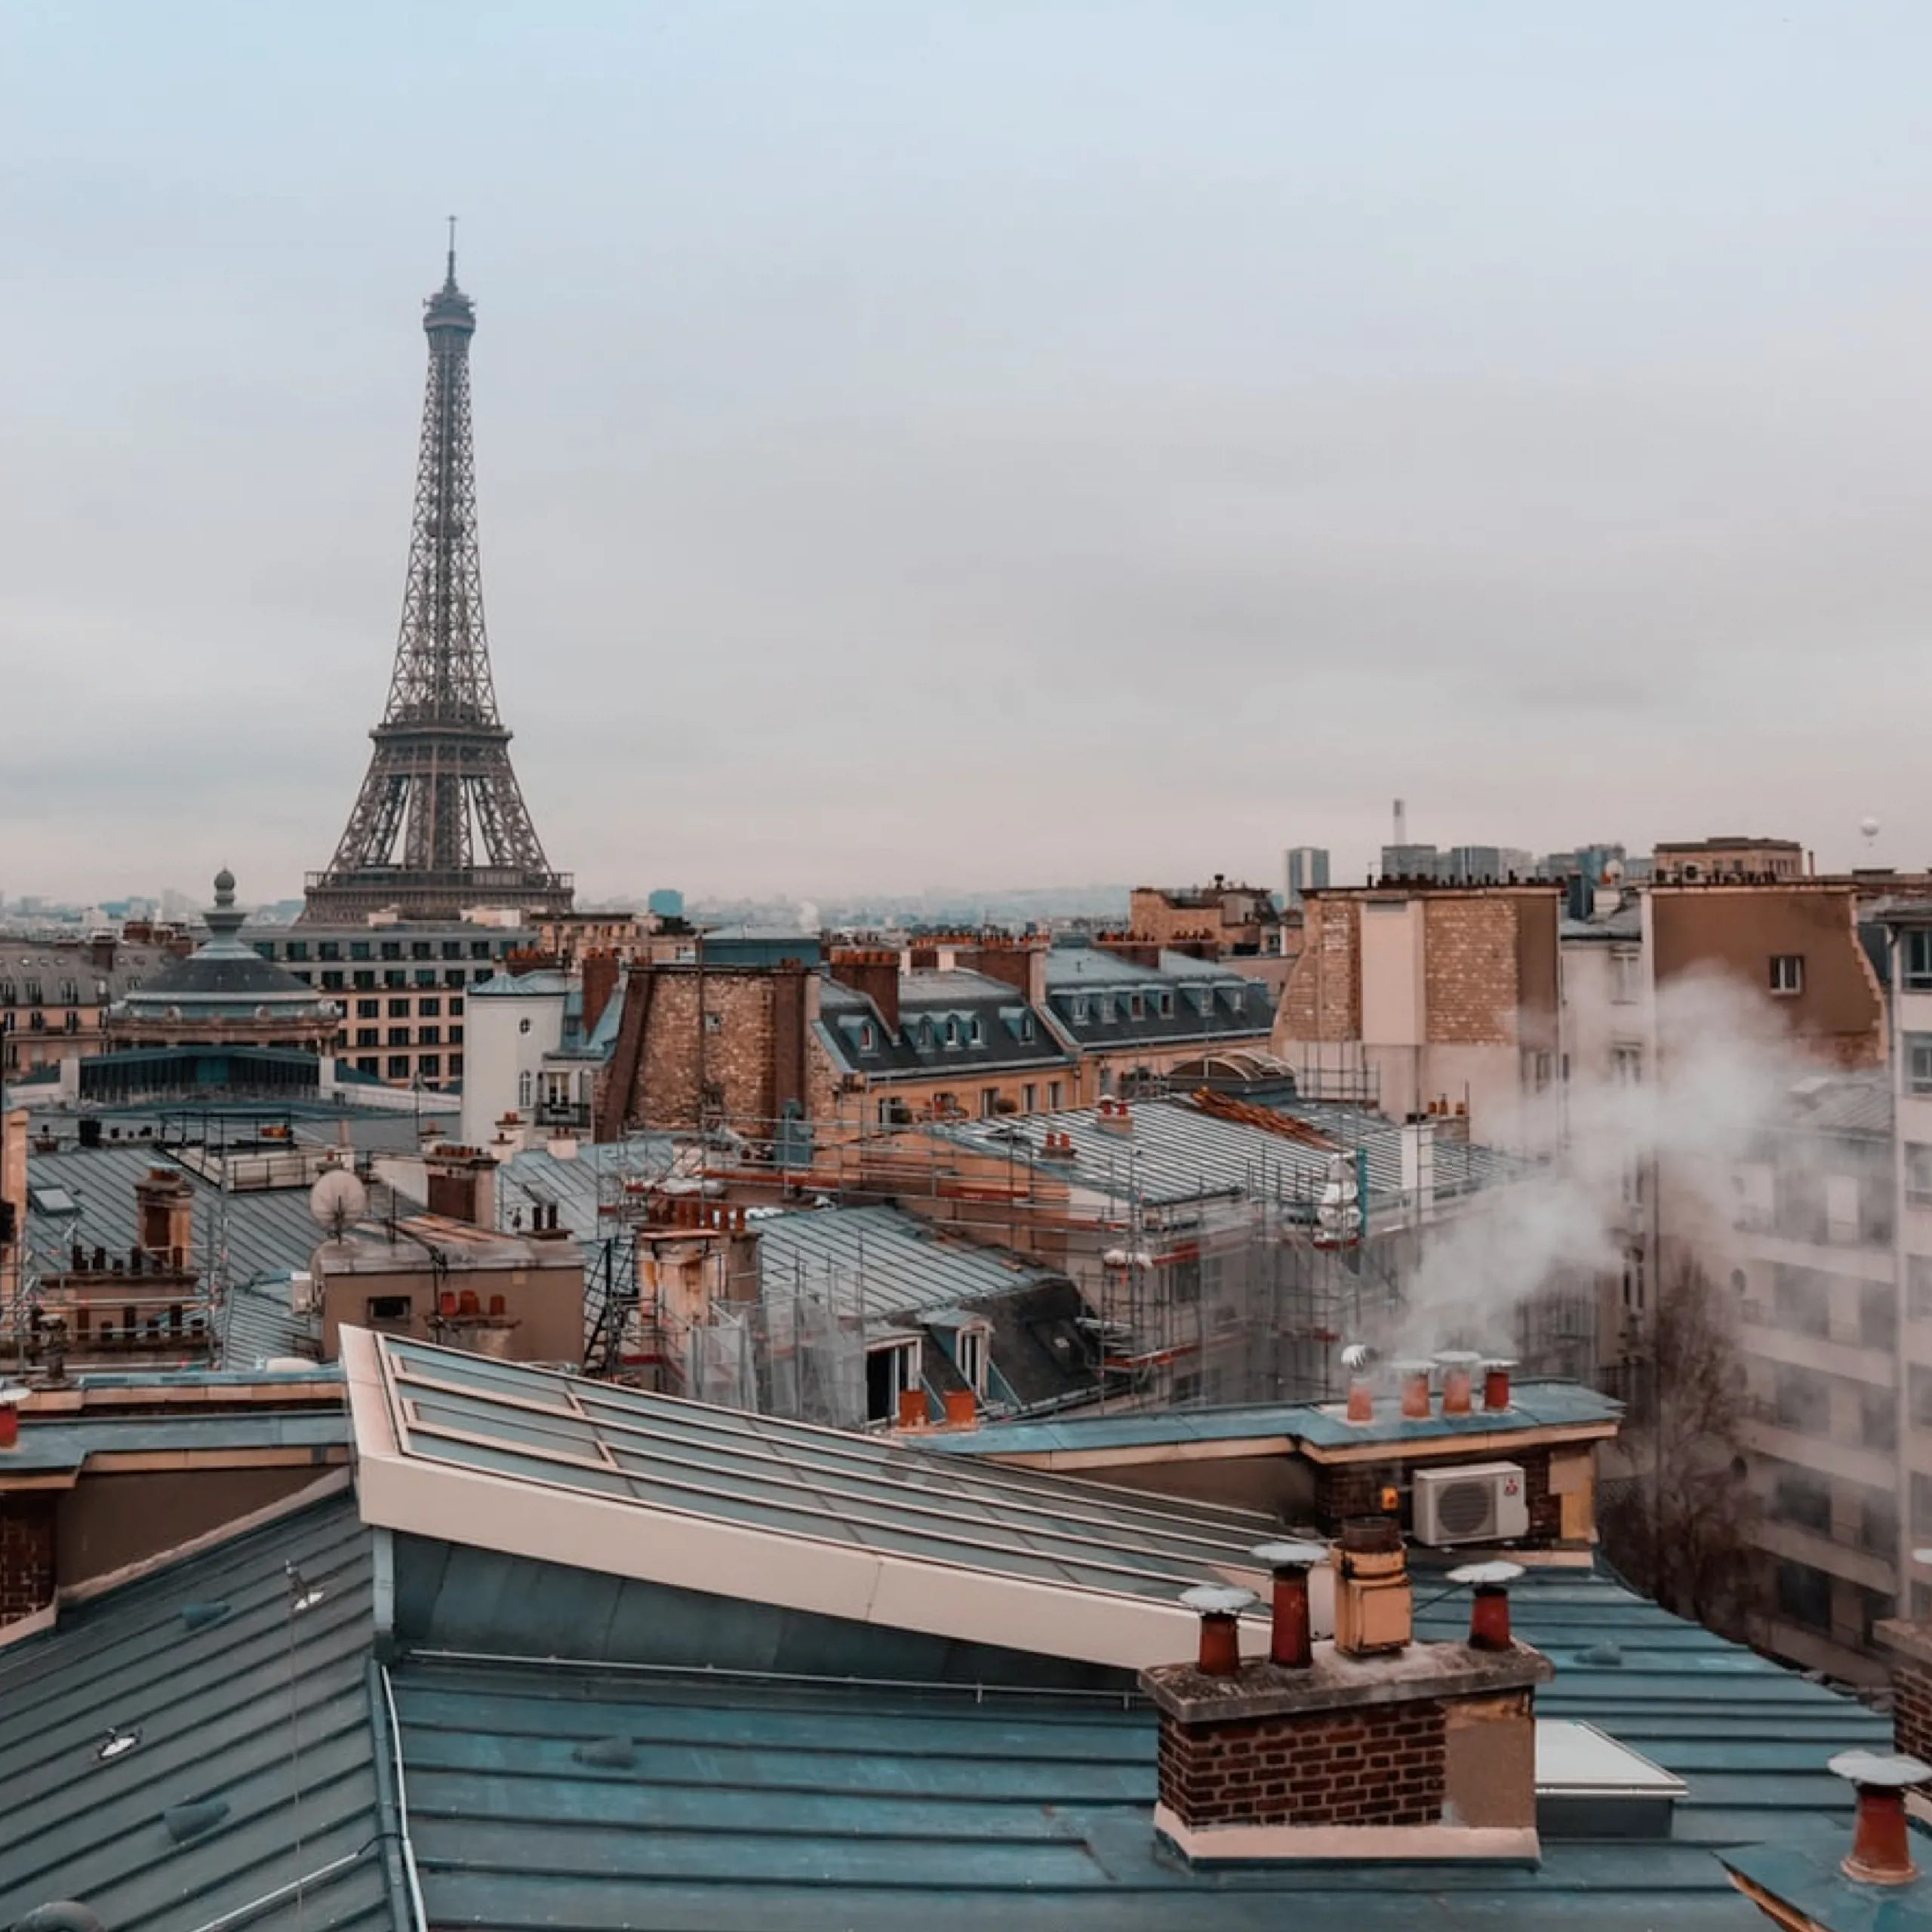 30 Best Paris Hotels with a View of the Eiffel Tower for 2023